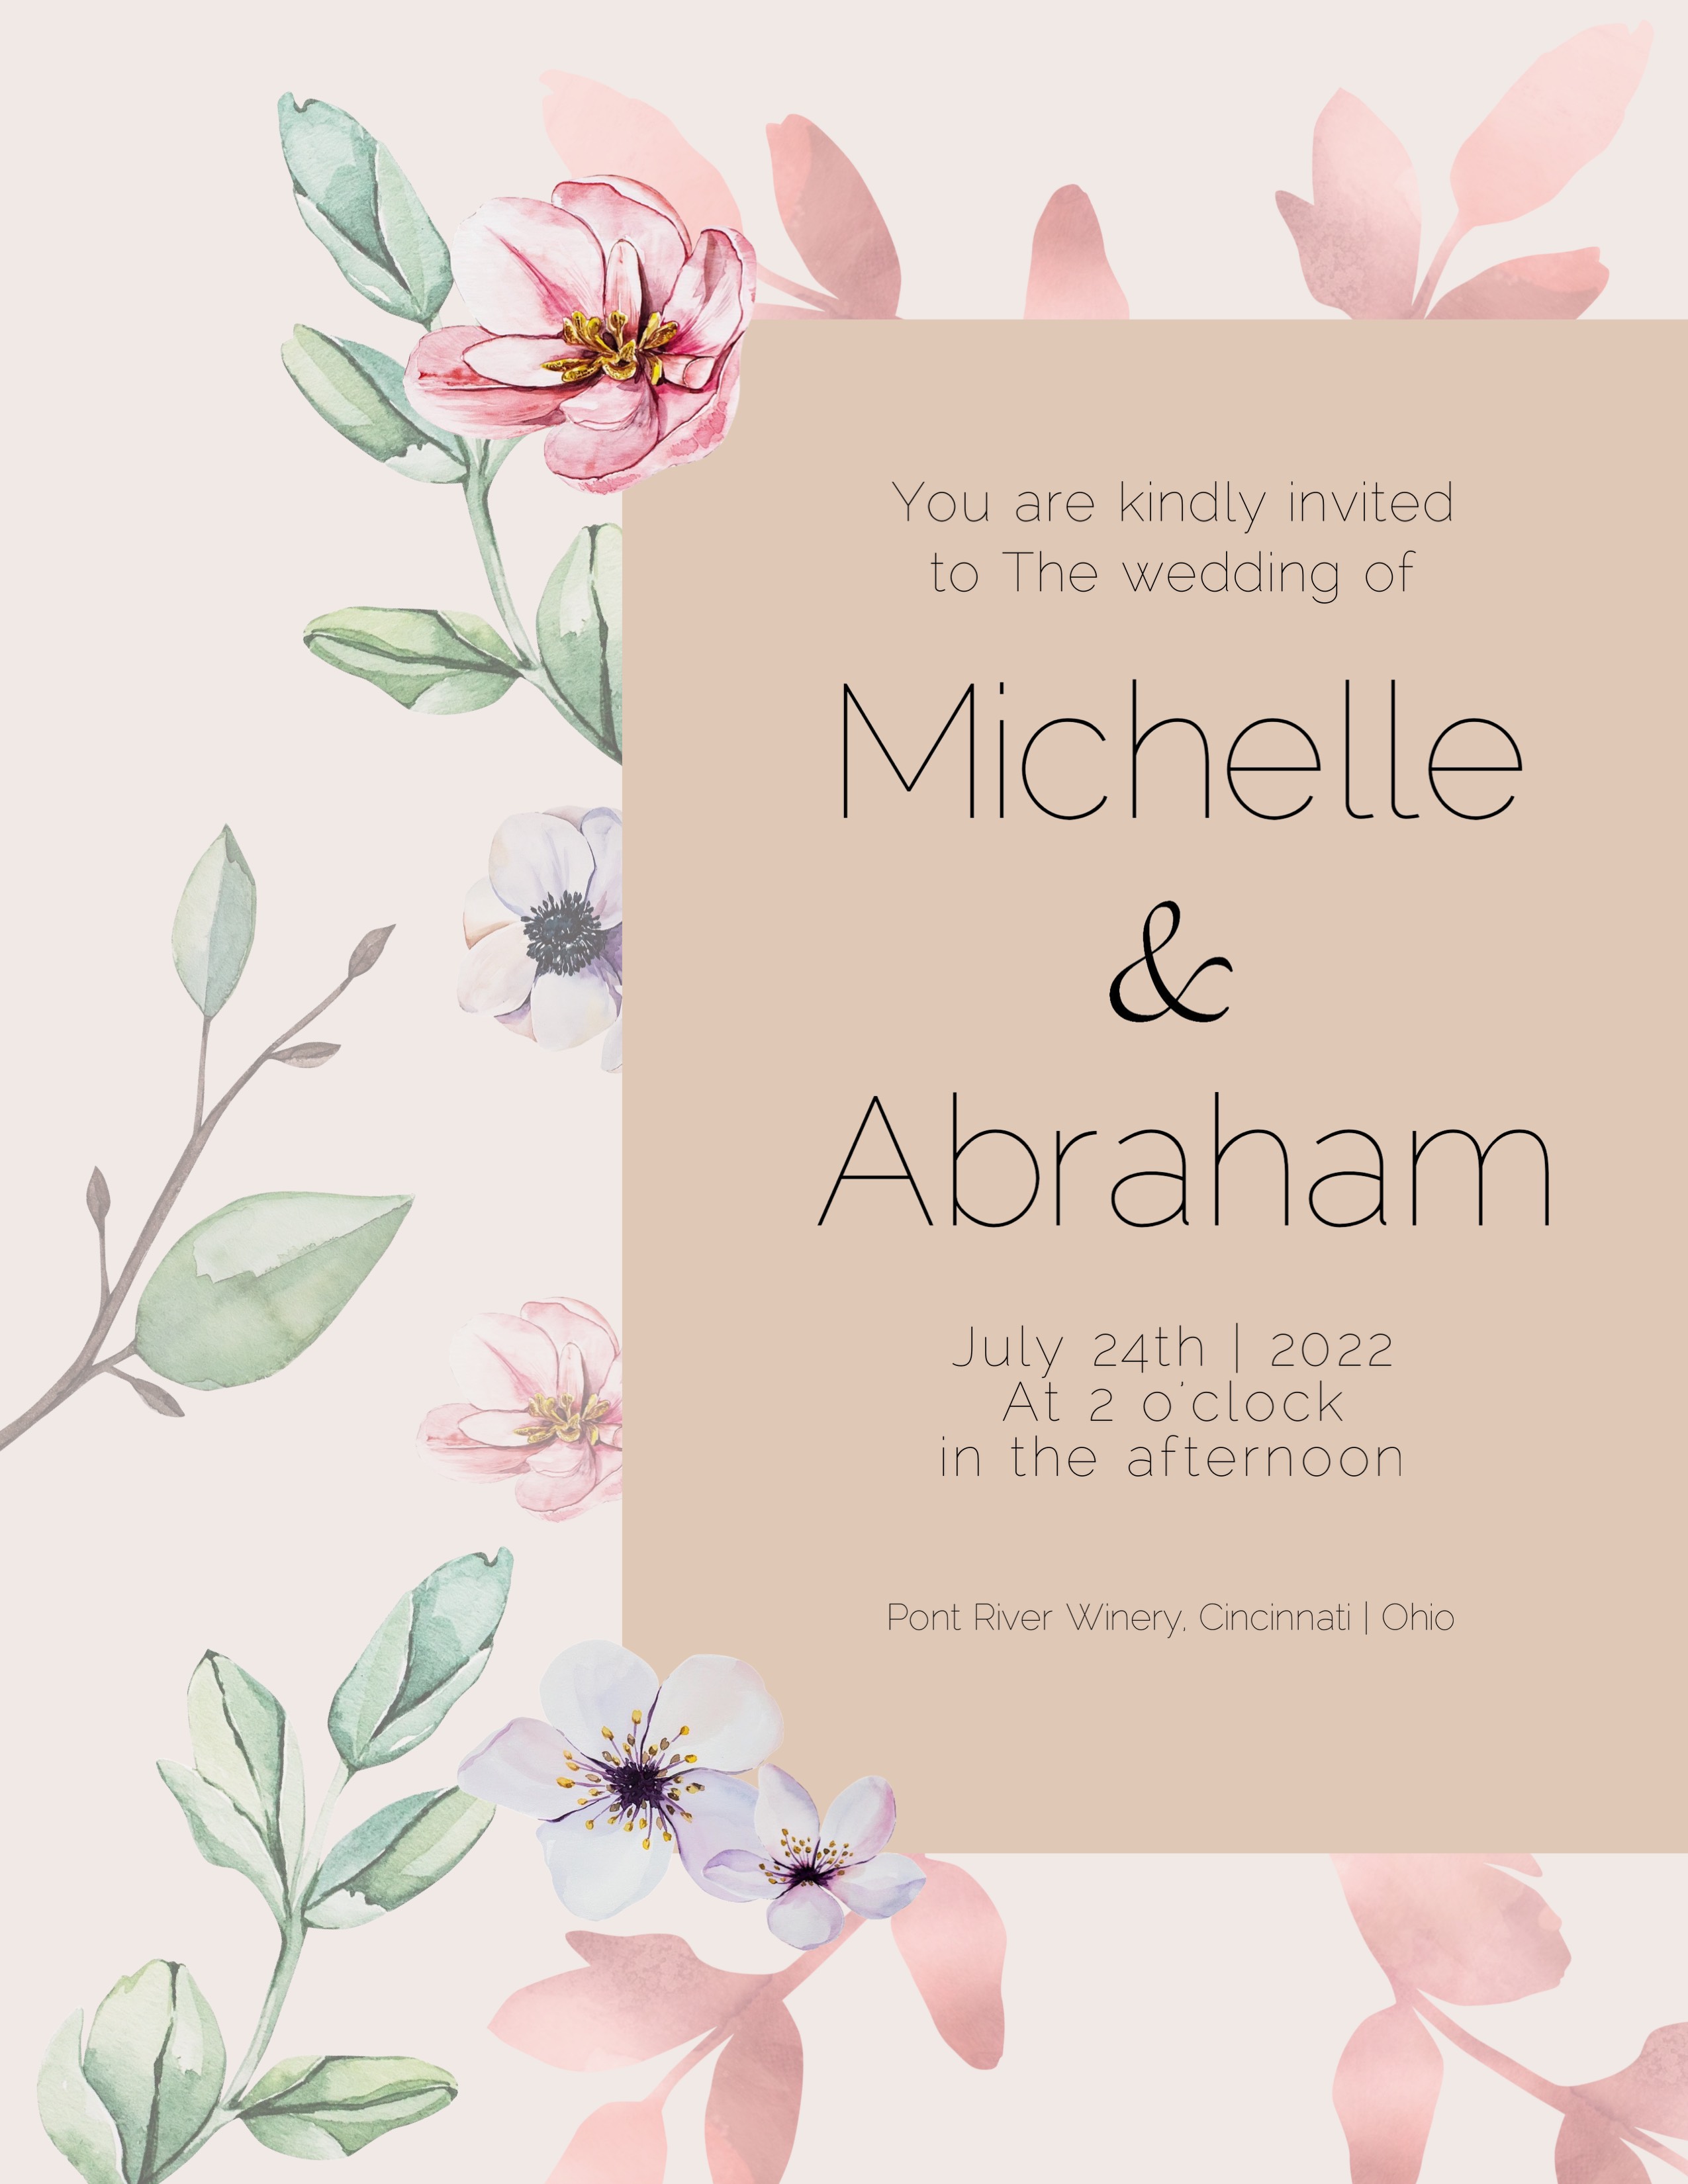 A Wedding Card With Watercolor Flowers On It Wedding Template